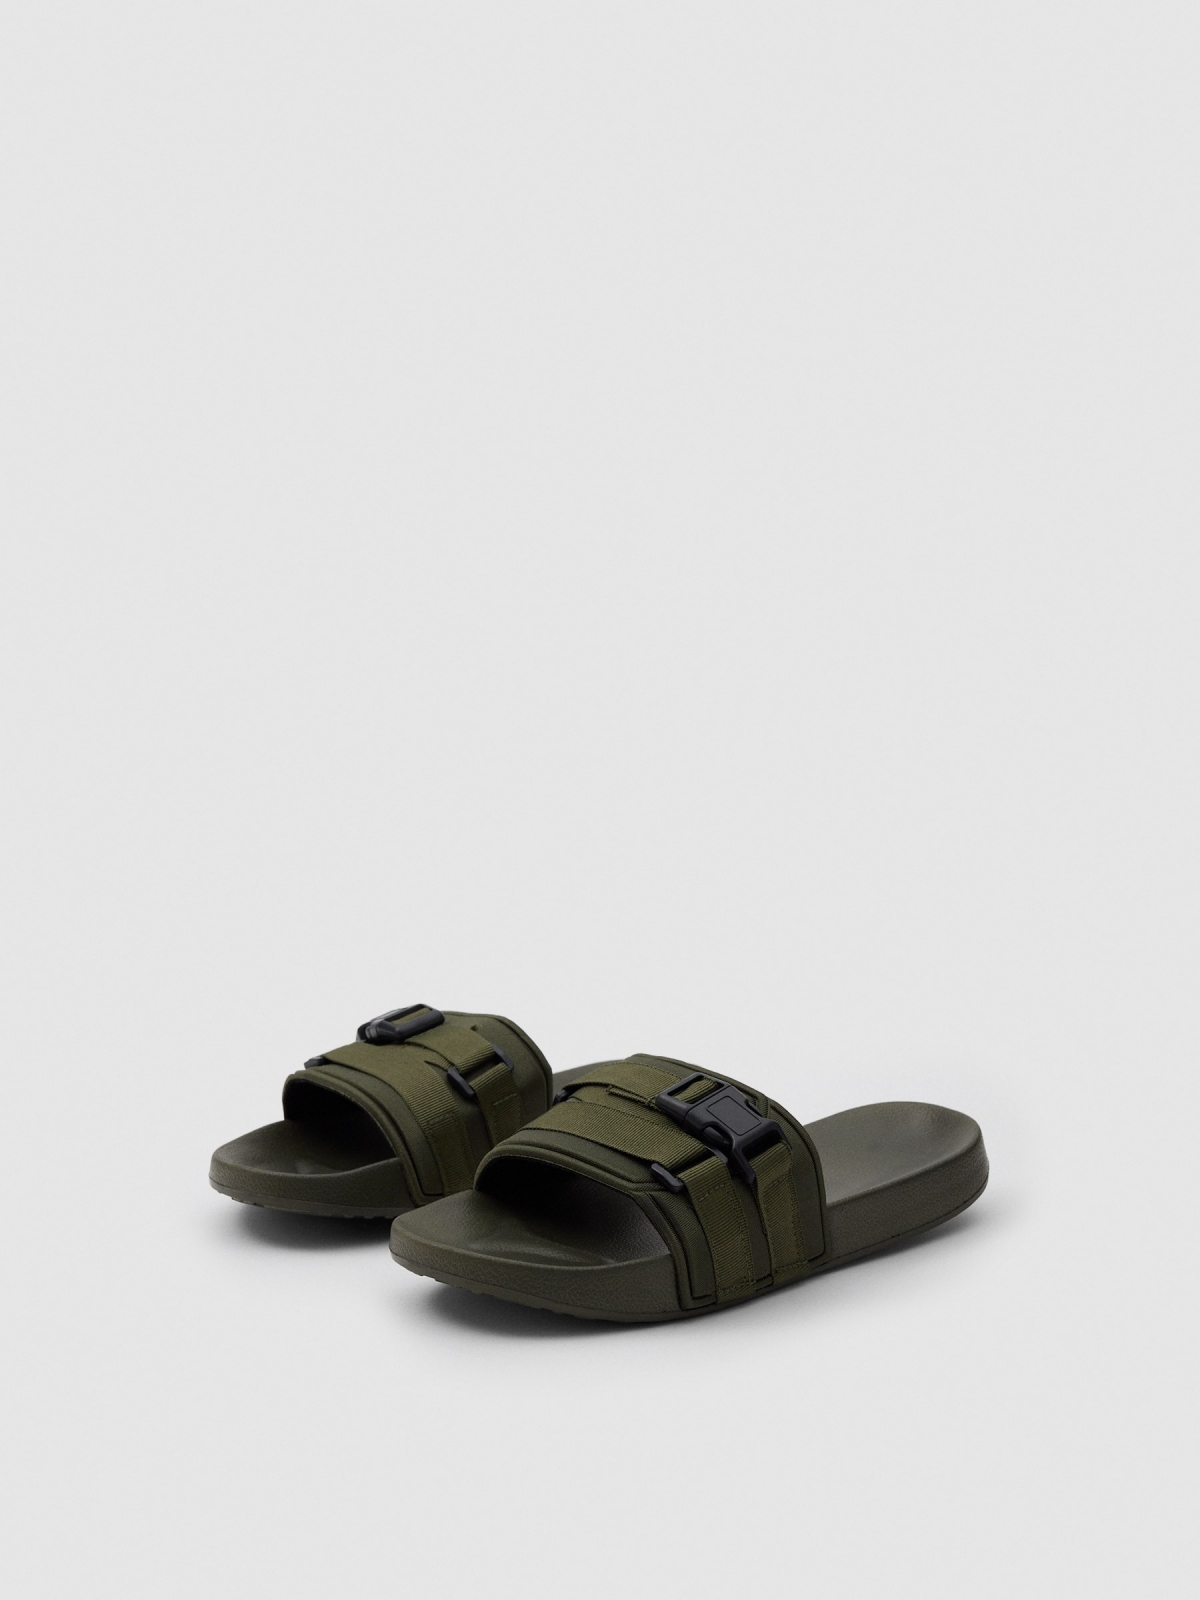 Buckle flip flop olive green lateral view